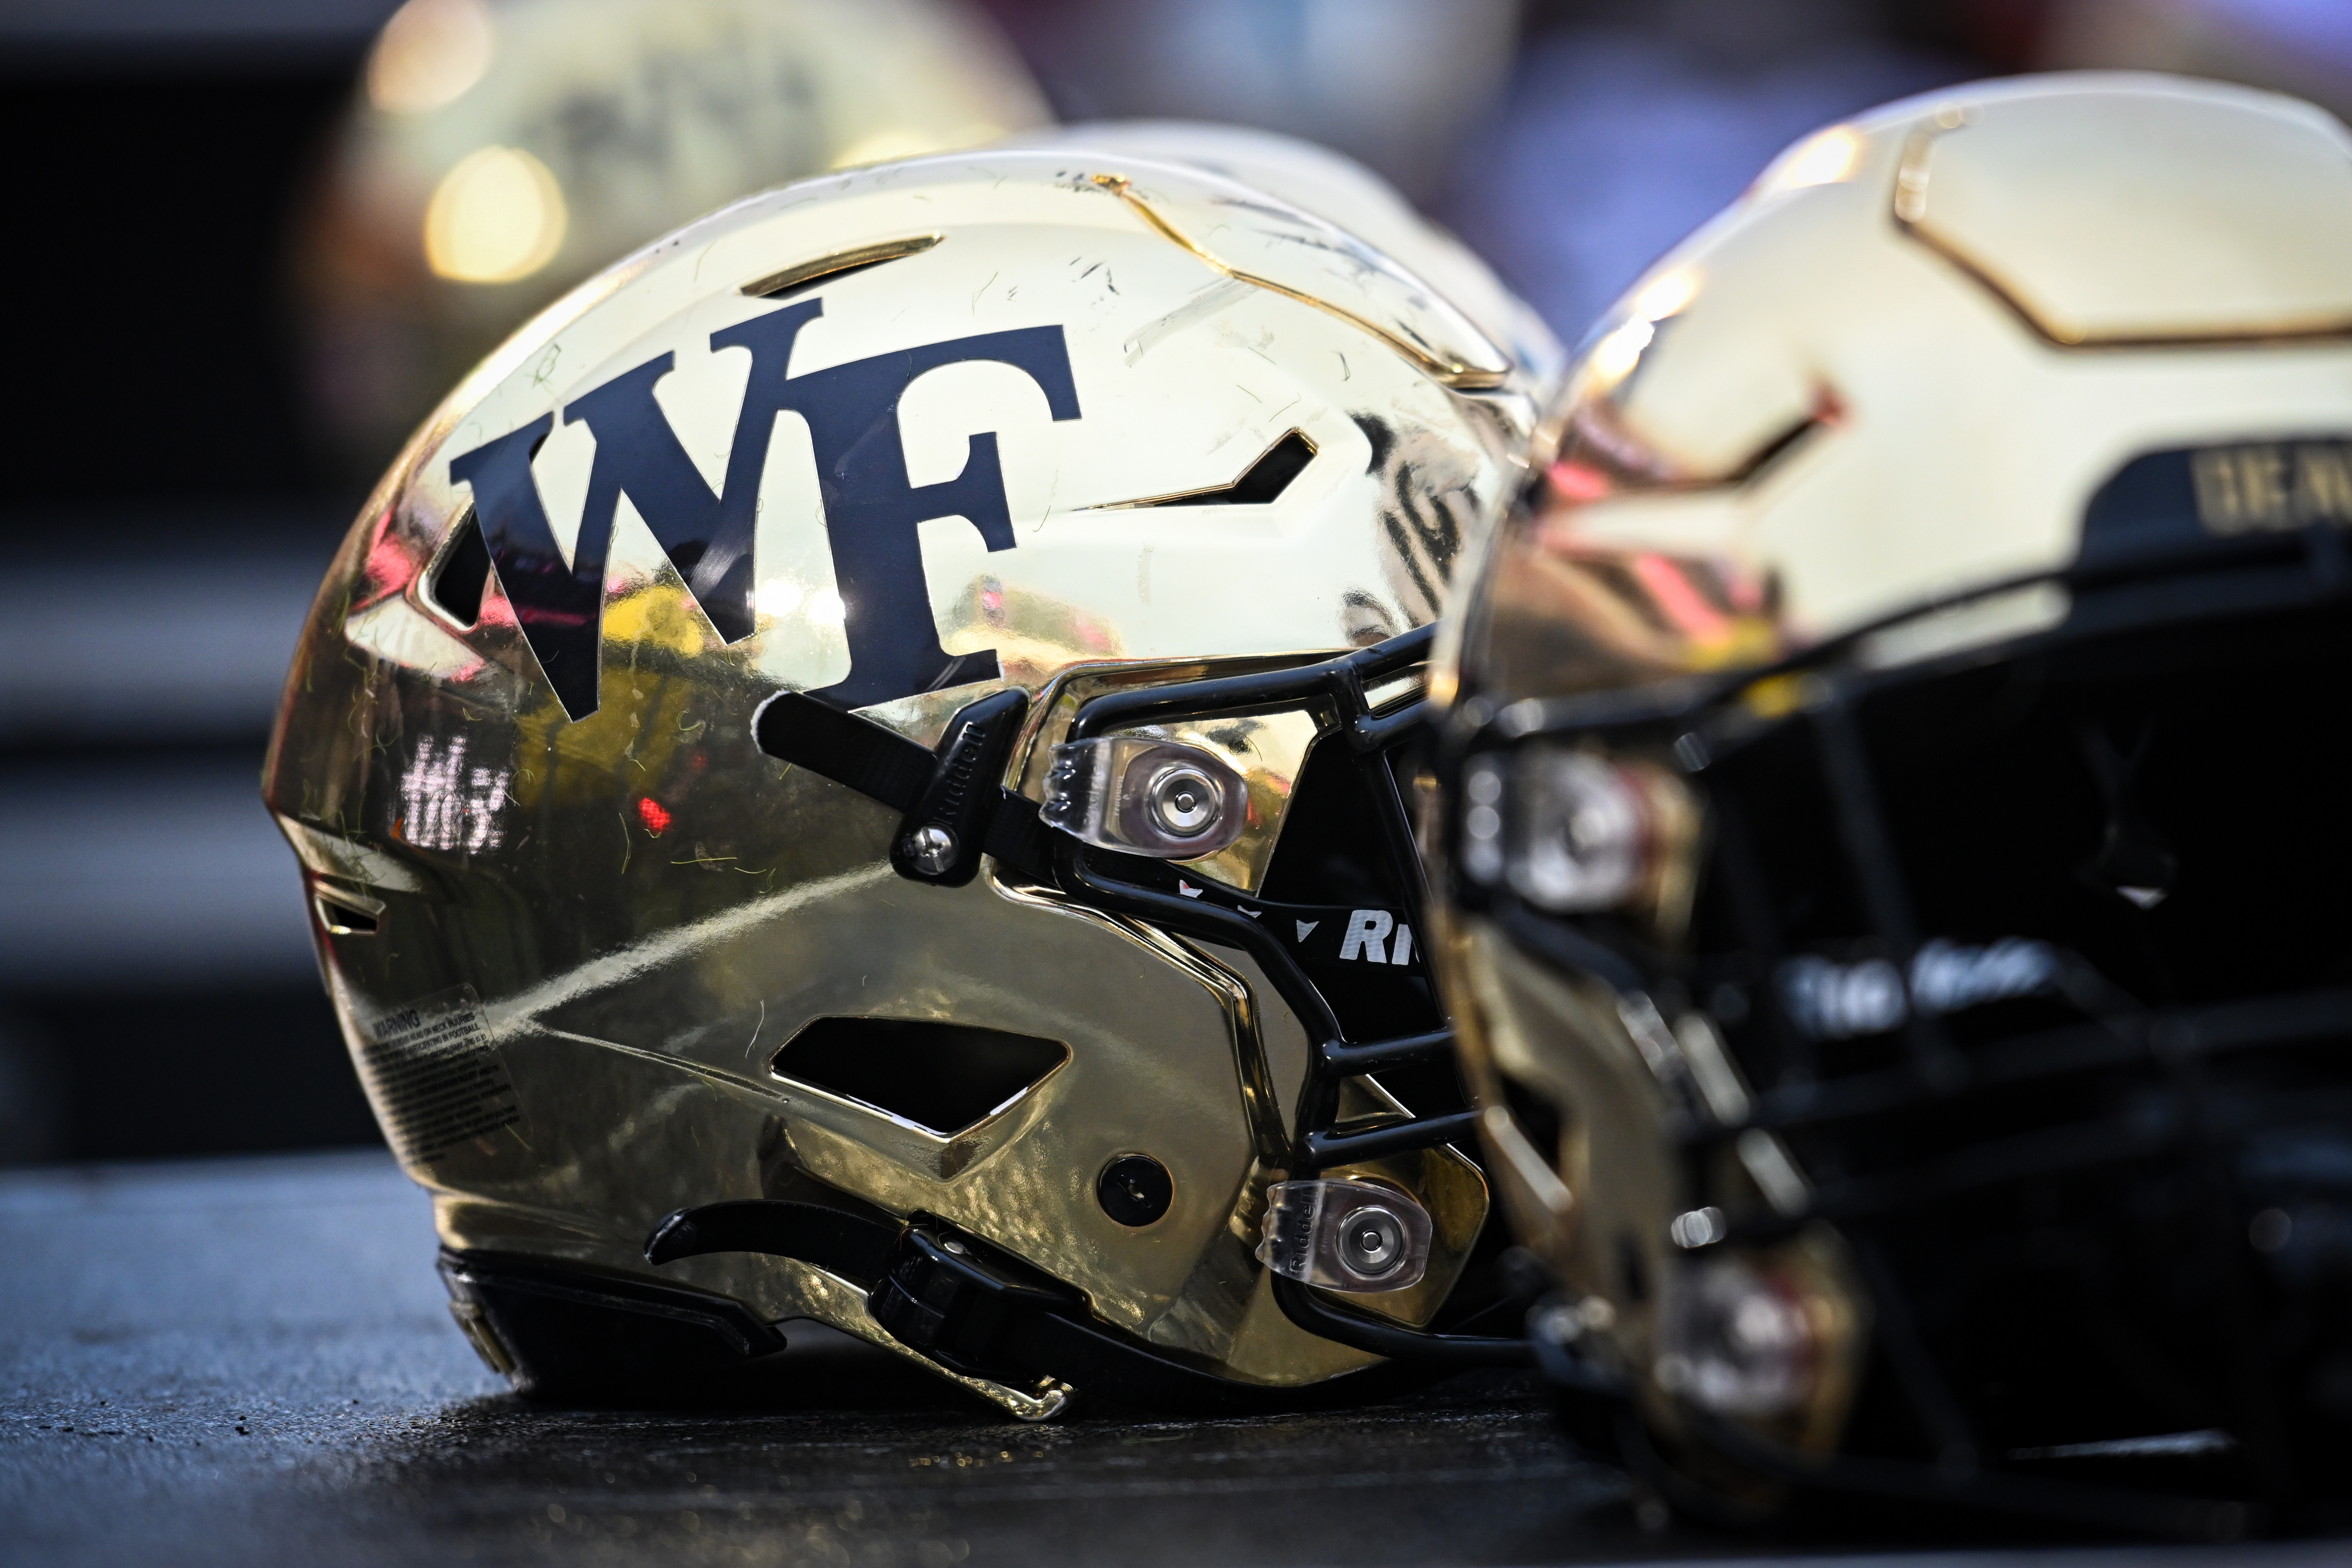 COLLEGE FOOTBALL: OCT 29 Wake Forest at Louisville